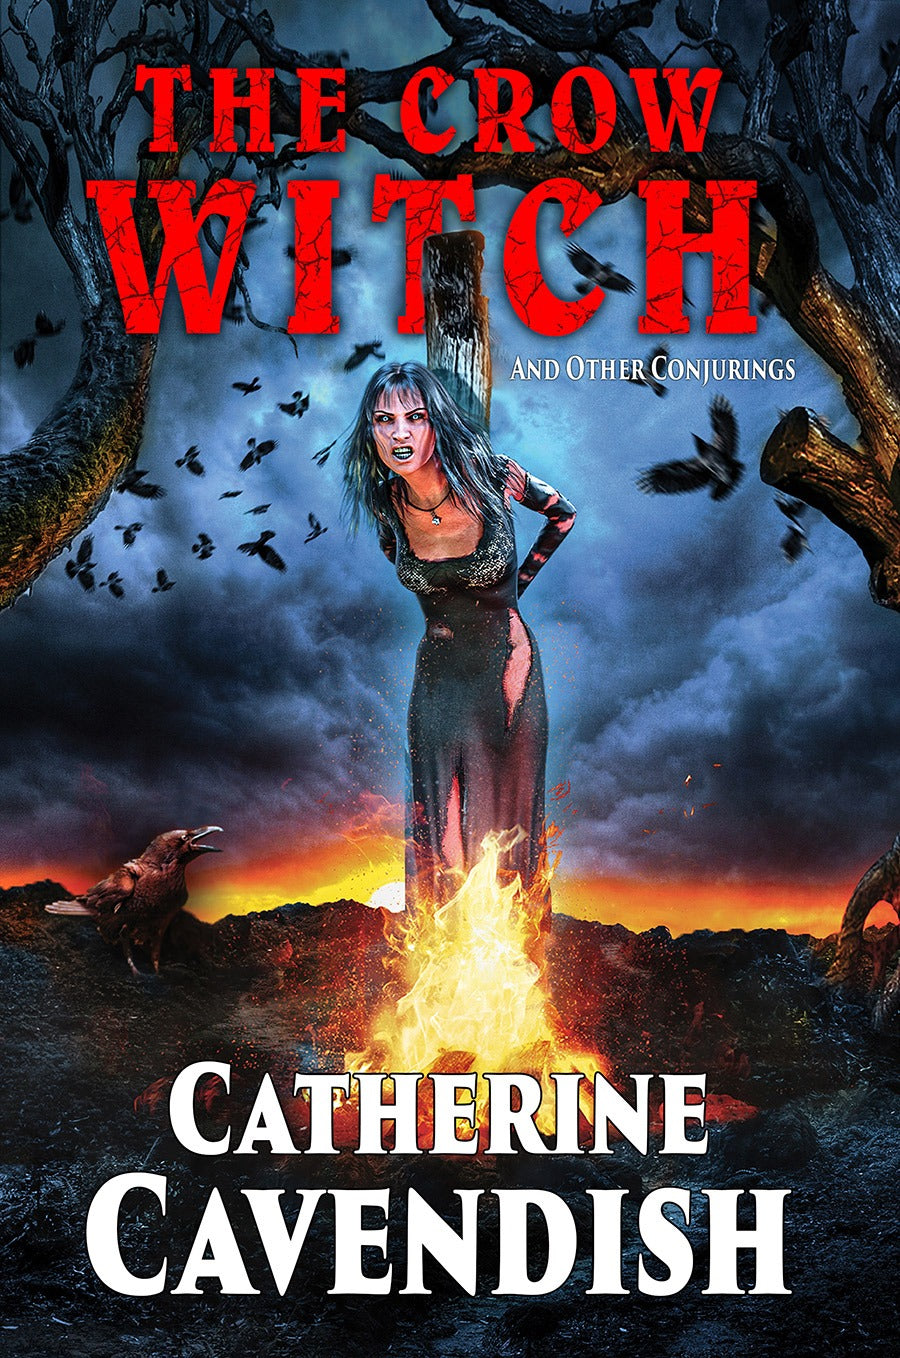 The Crow Witch and Other Conjurings by Catherine Cavendish